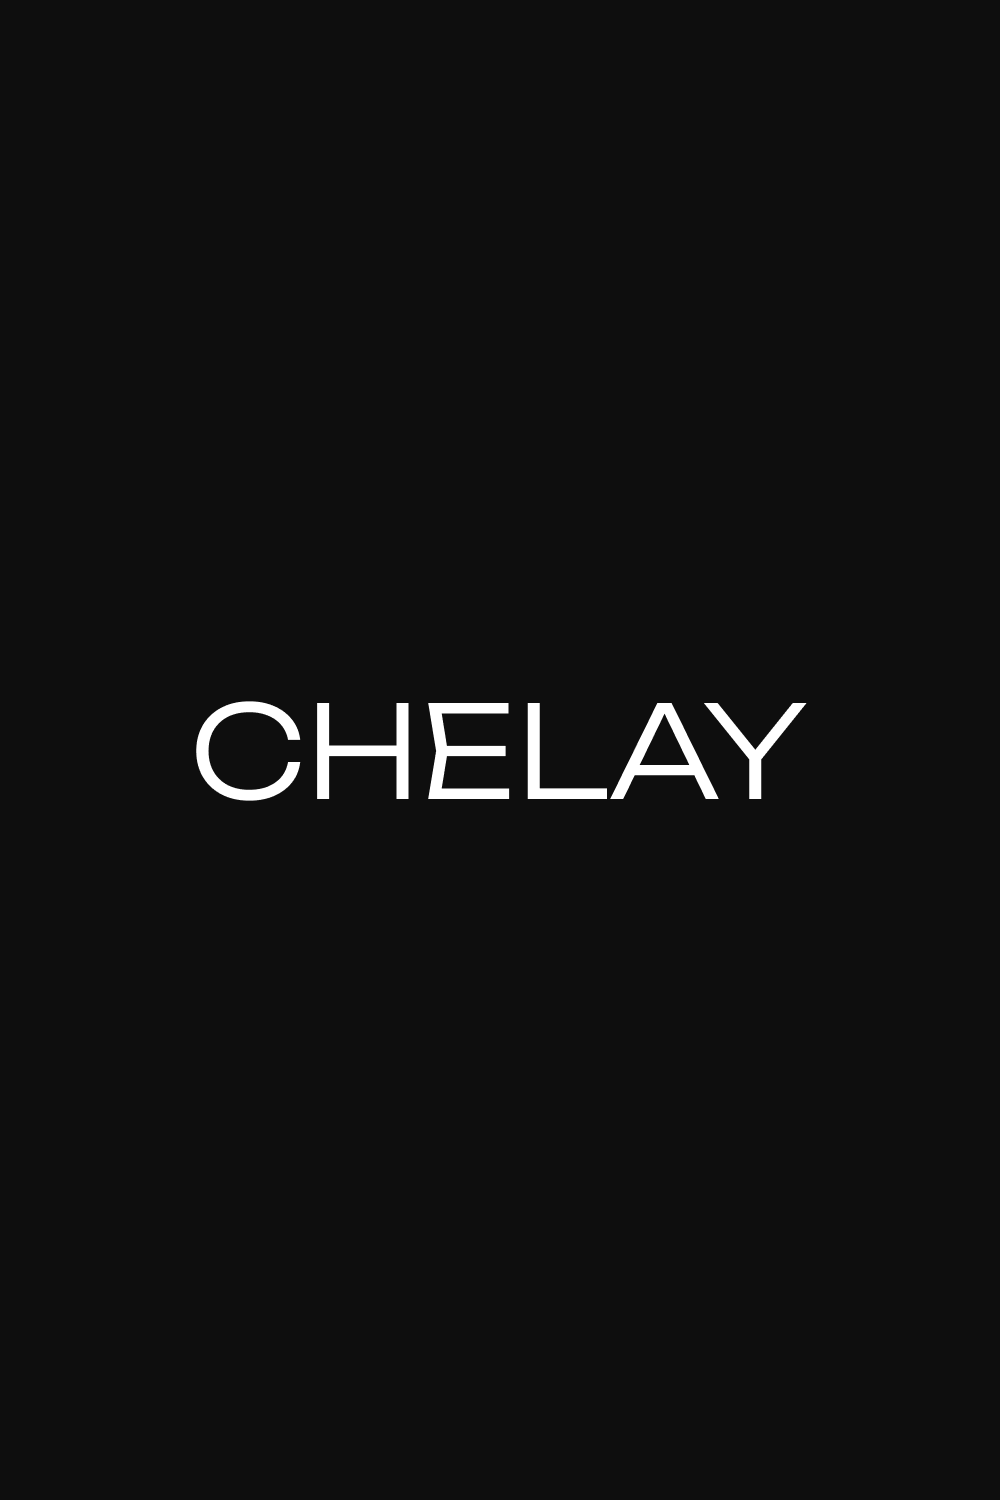 Chelay pinterest preview image.